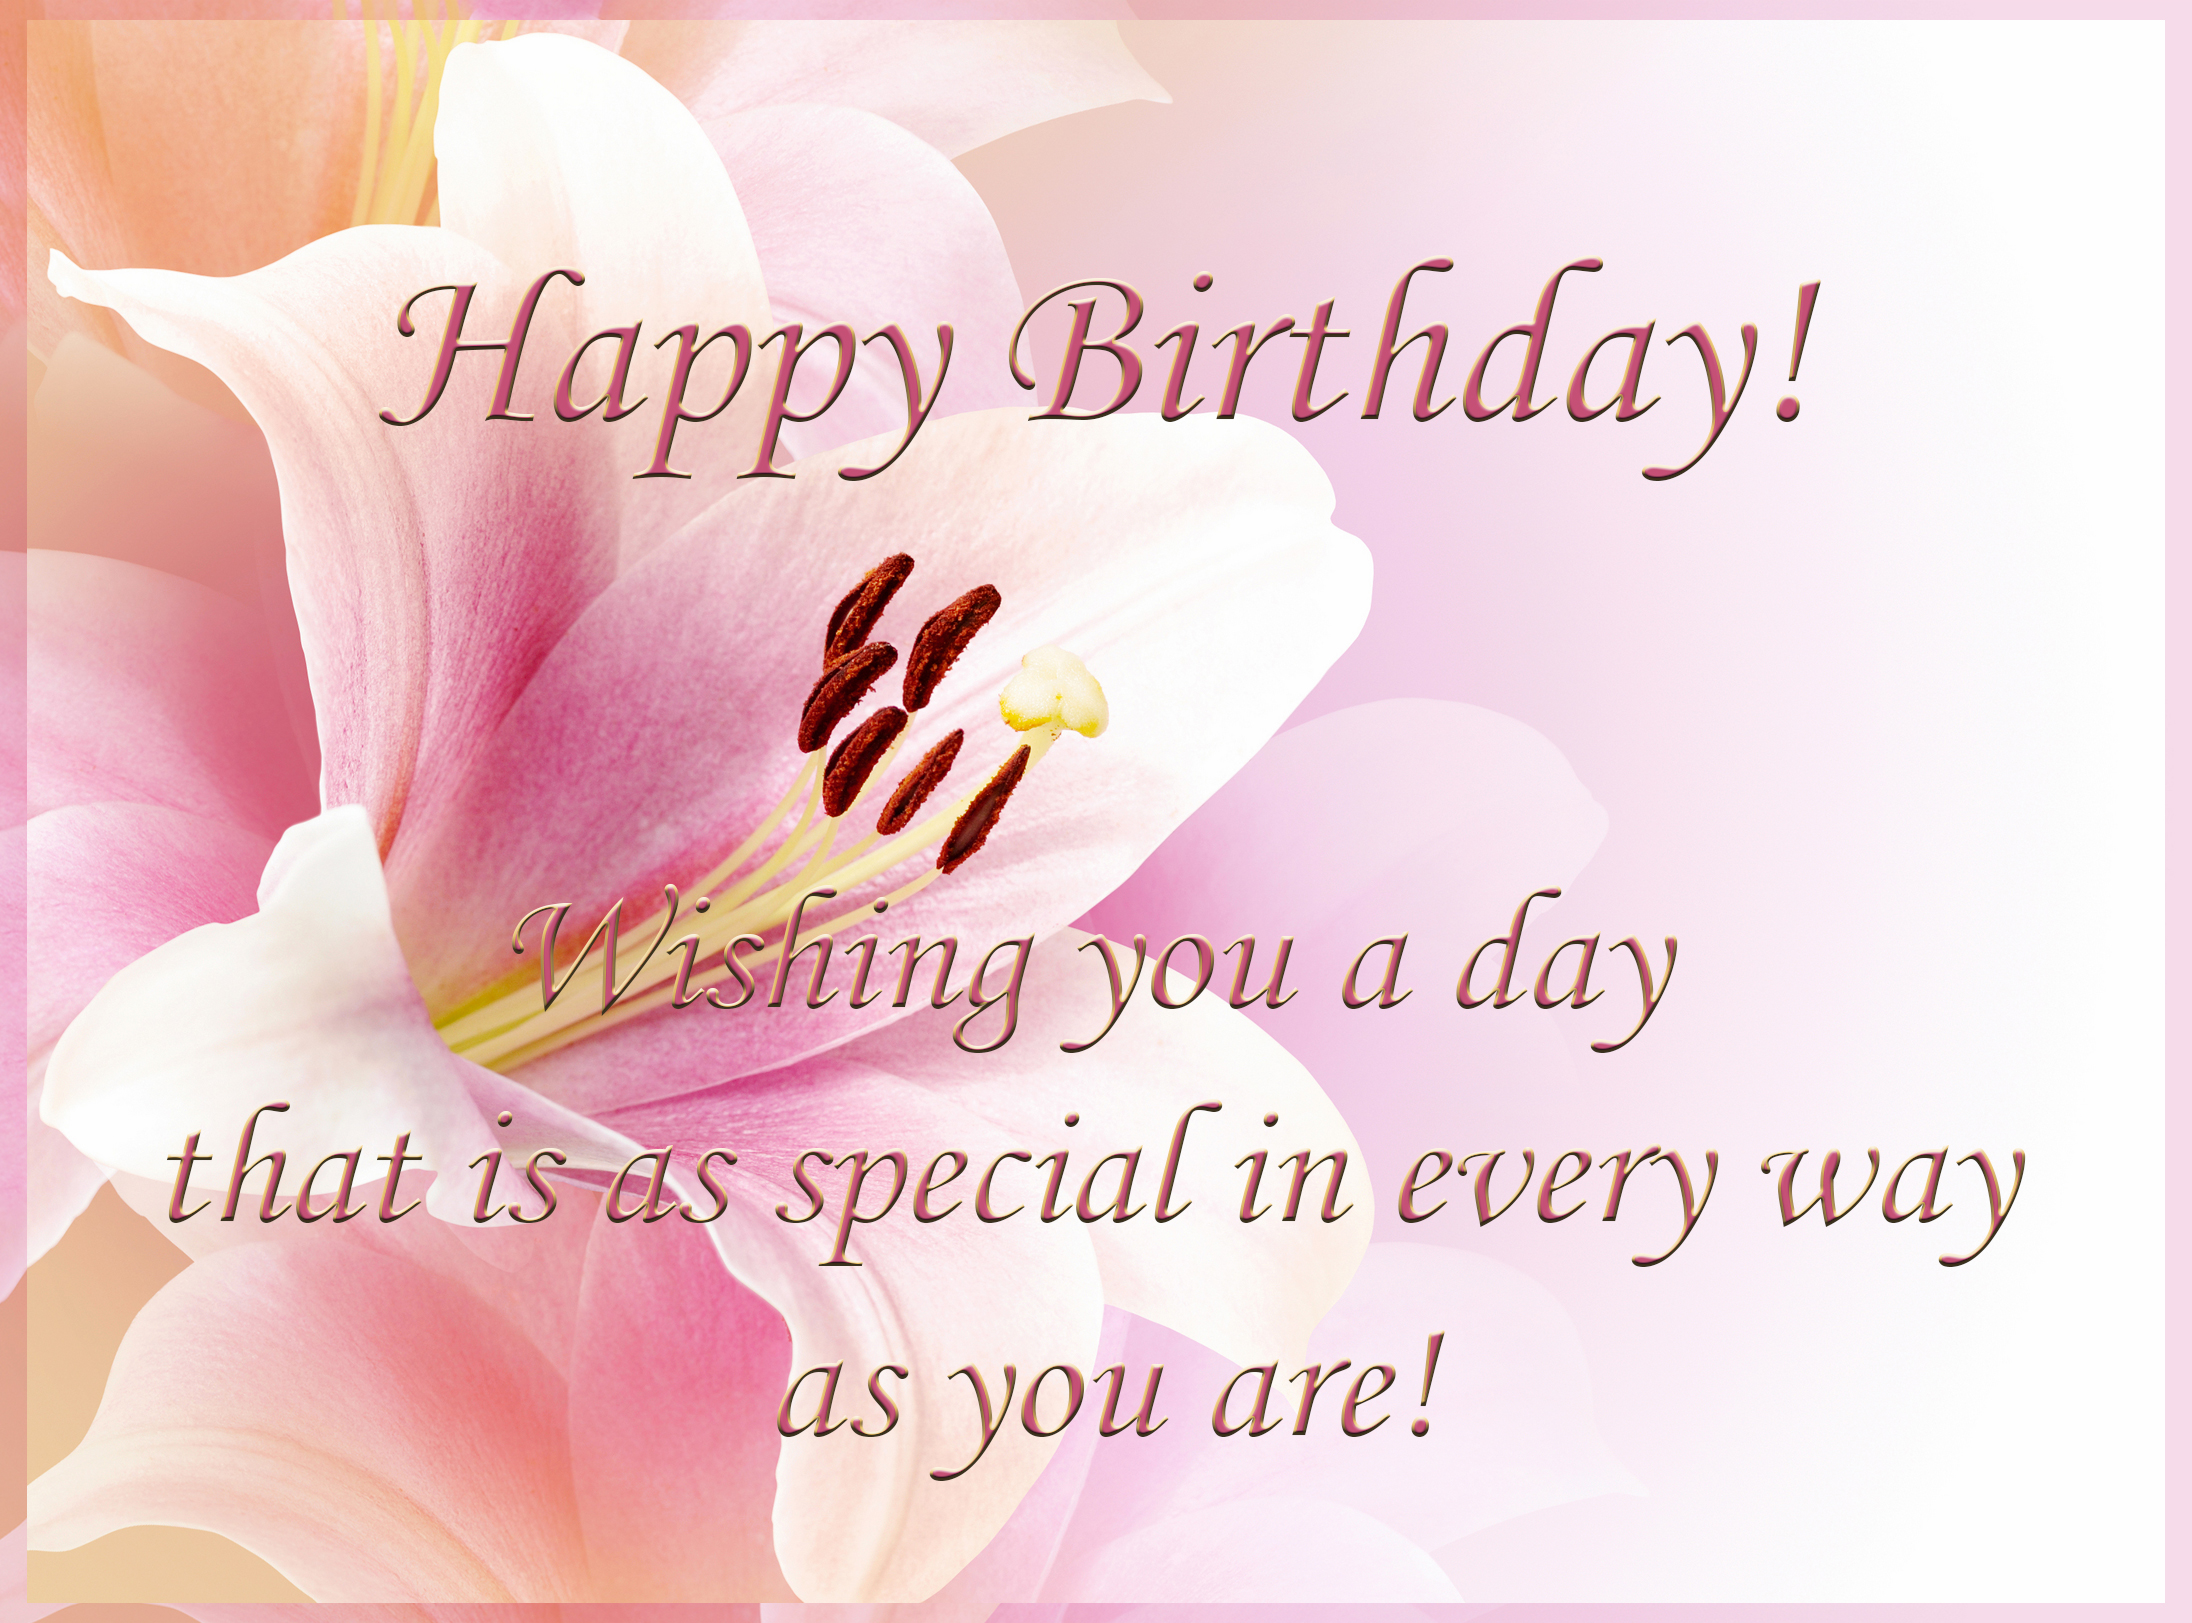 Happy Birthday Greeting Card | Gallery Yopriceville - High-Quality Free ...